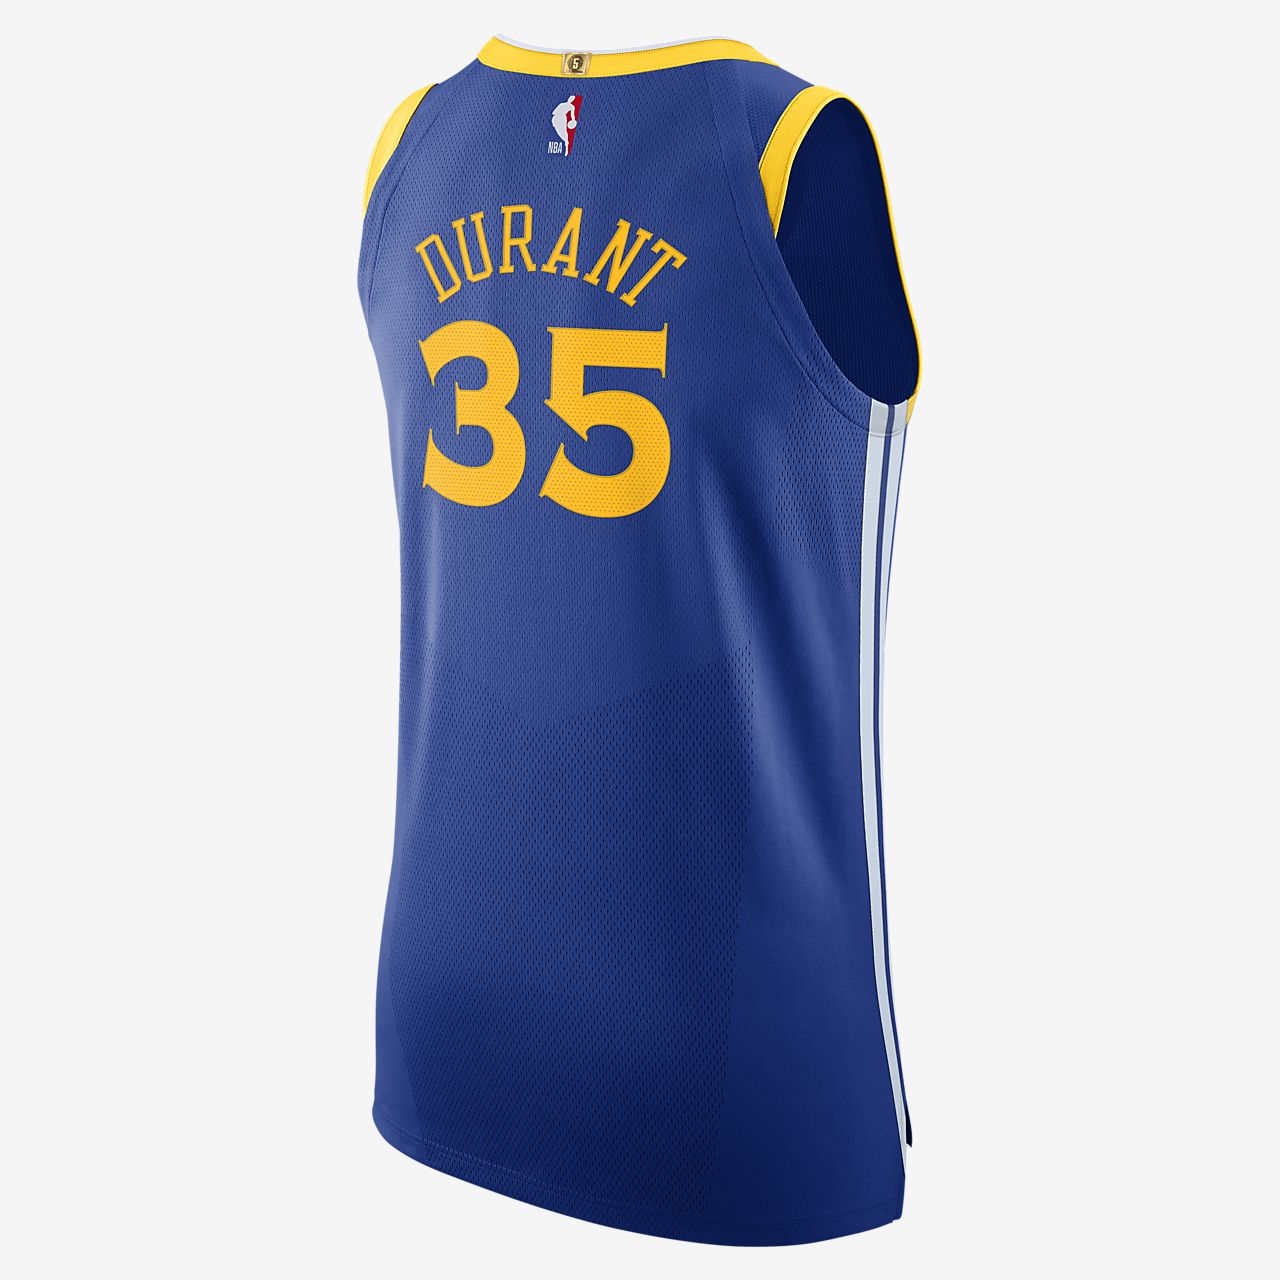 kevin durant in warriors jersey